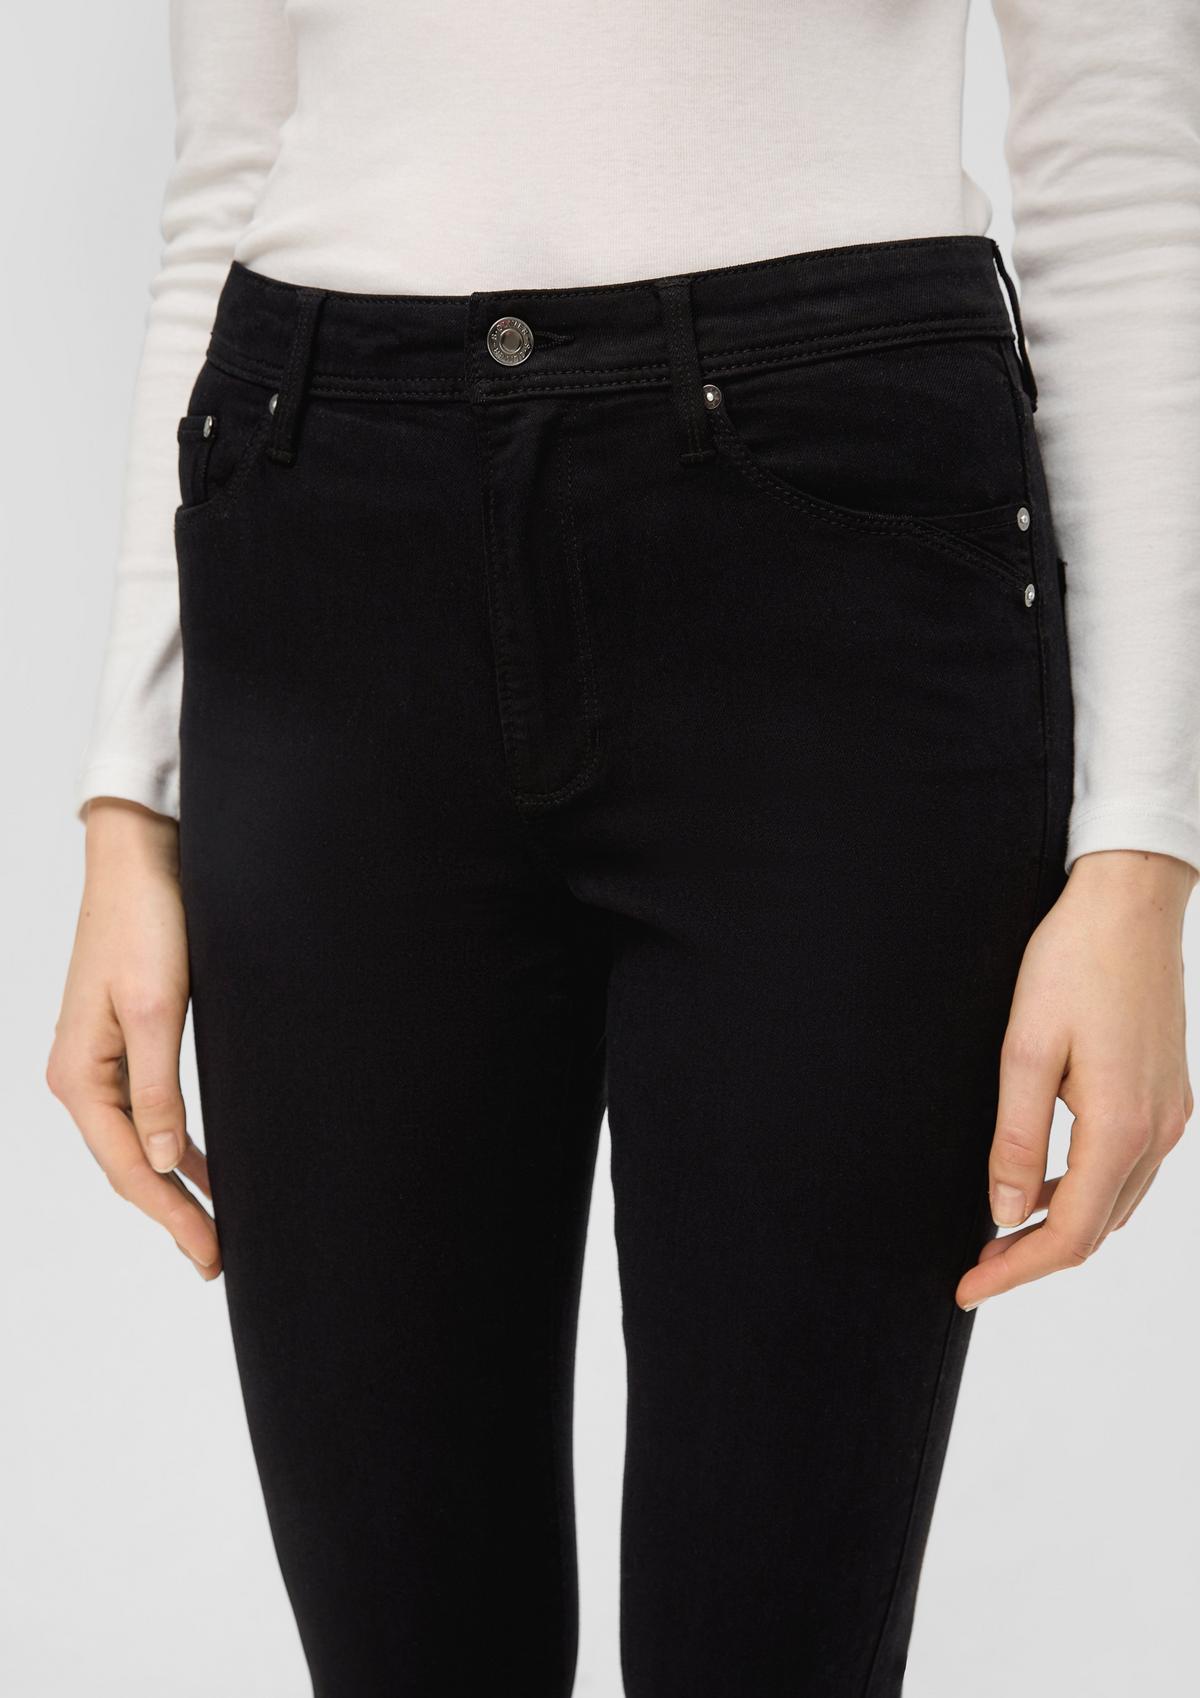 s.Oliver Slim fit Betsy jeans / mid rise / bootcut leg